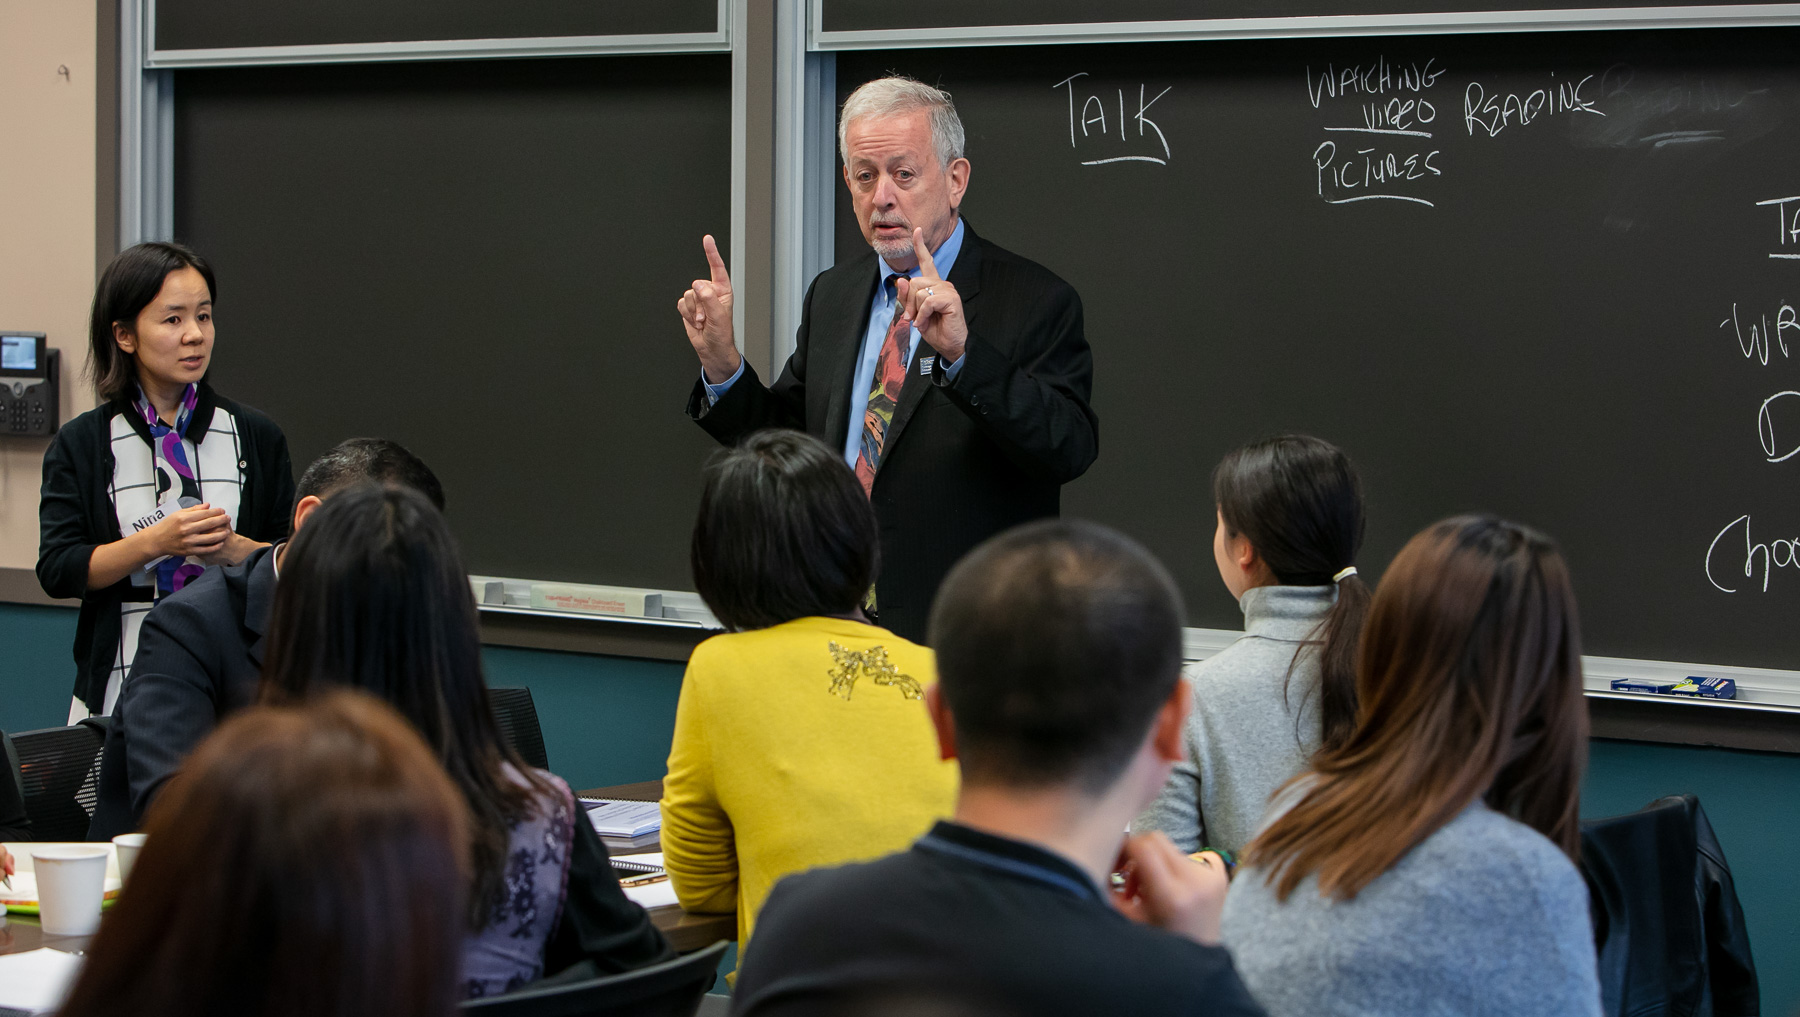 Paul Zionts demonstrates a learning technique that teachers from Beijing, China can implement during their own class lectures. (DePaul University/Randall Spriggs)